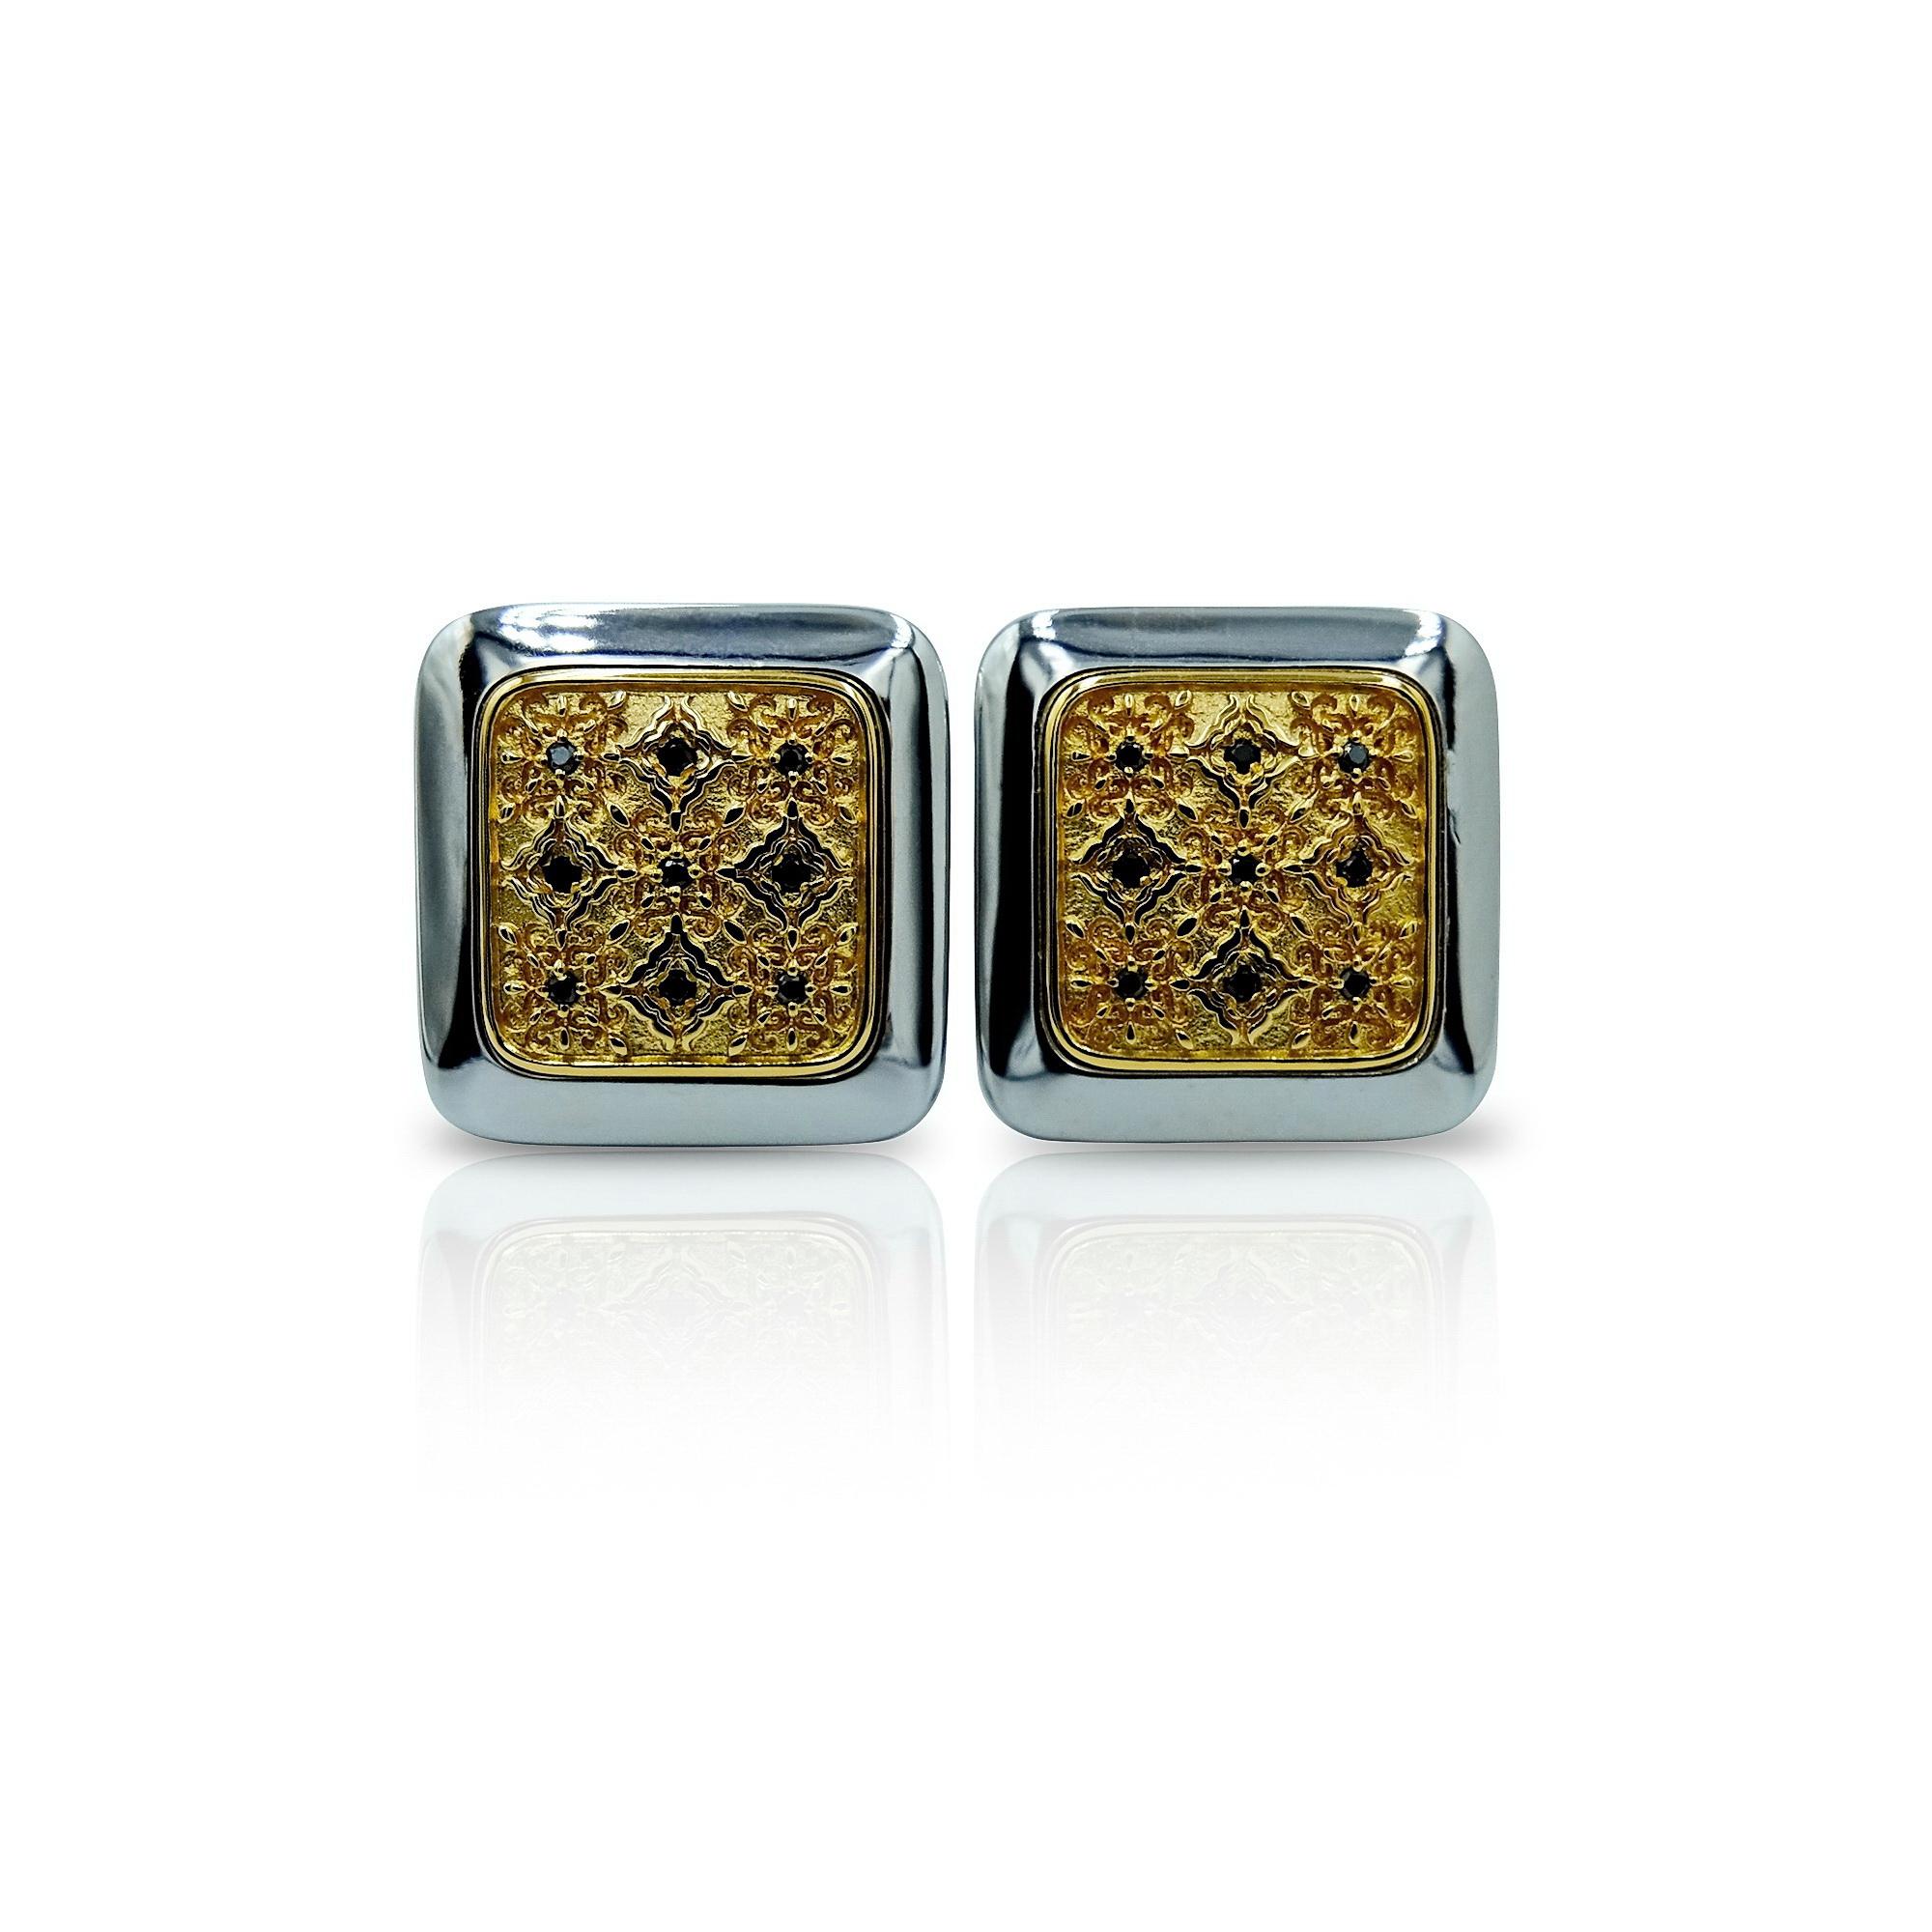 Contemporary Luca Jouel Black Diamond Square Floral Cufflinks in Yellow Gold and Silver